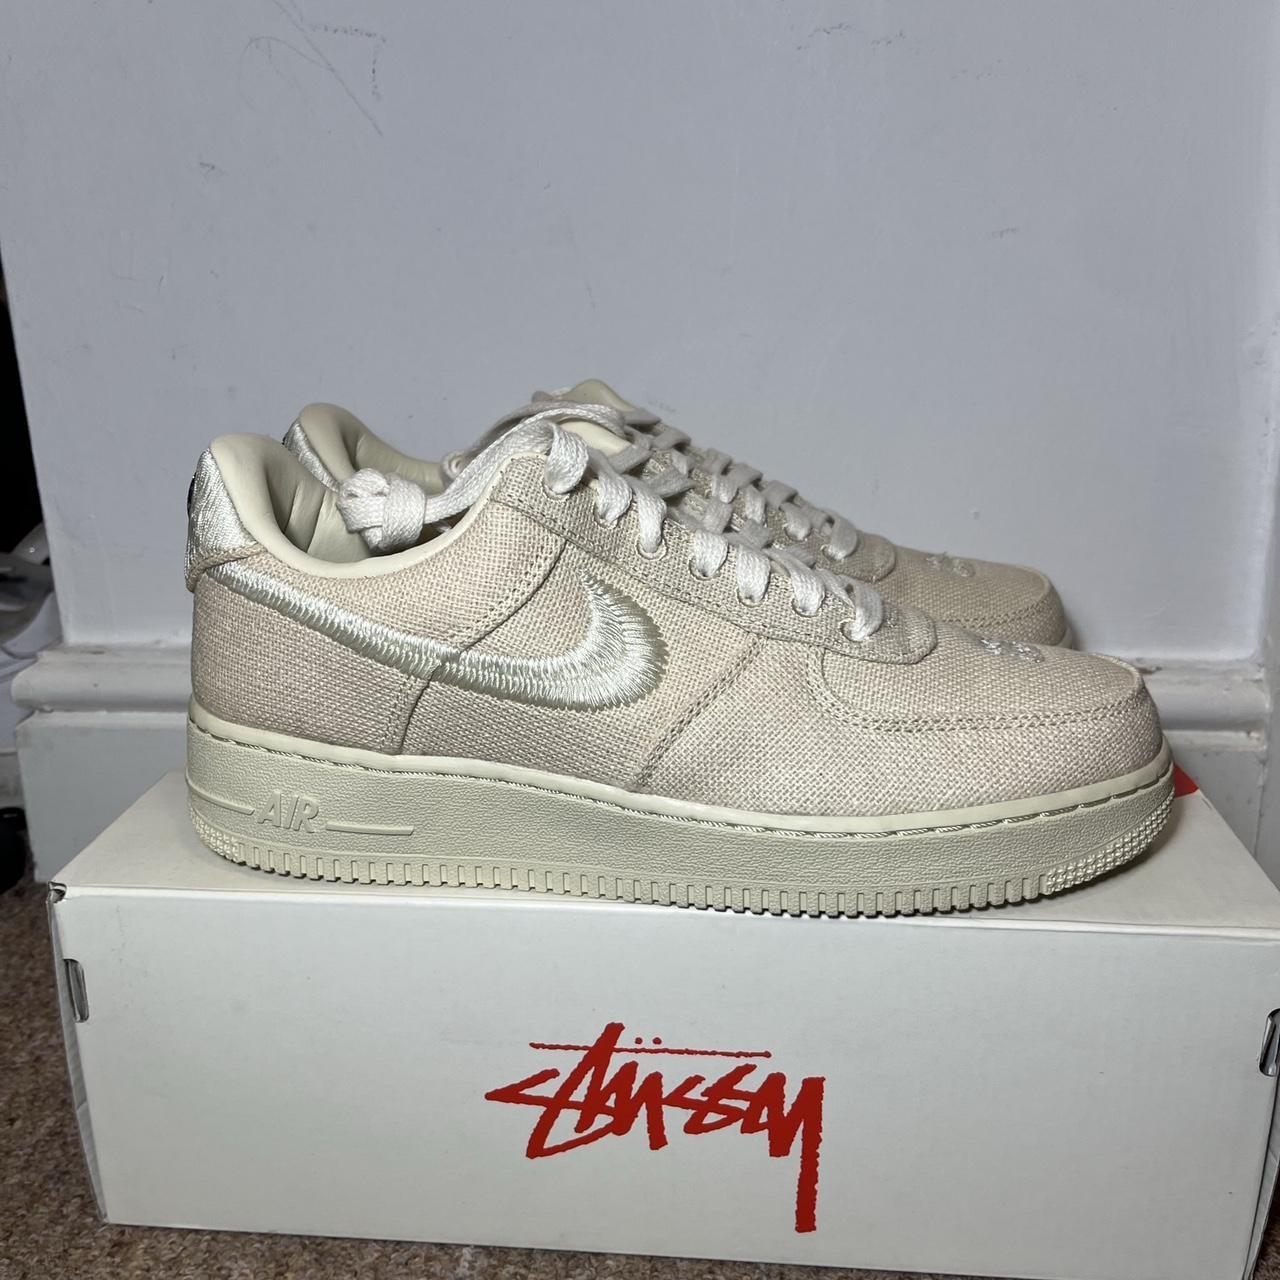 Stüssy x Nike Air Force 1 low fossil UK 7. Open to...